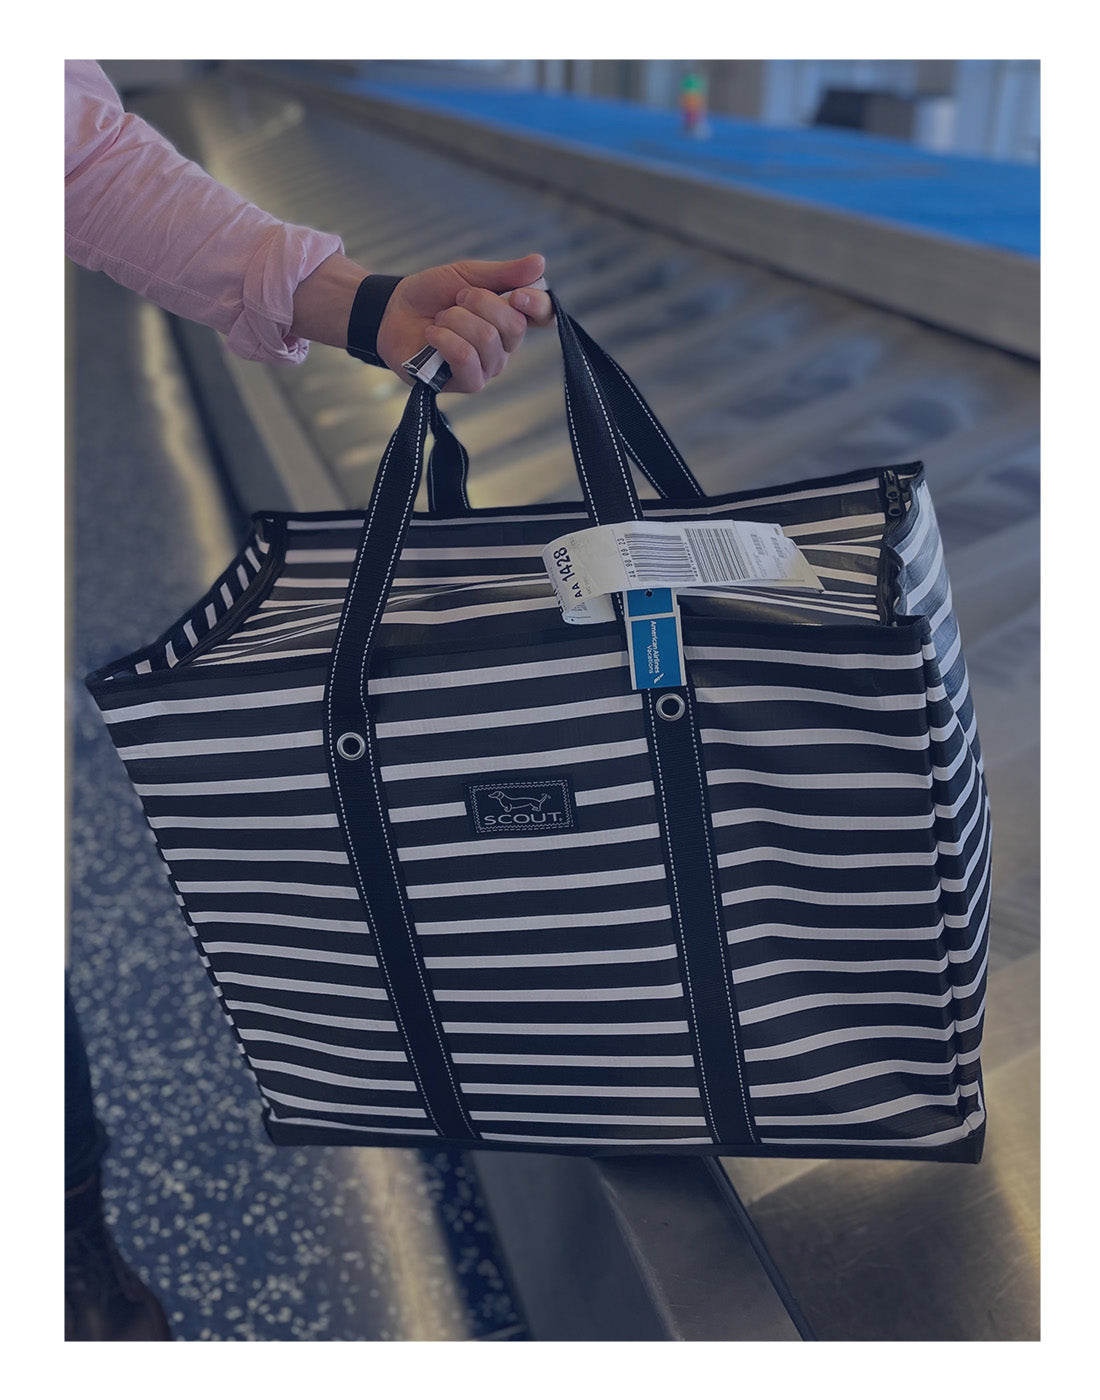 Tote Bags For School - The One Packing Solution